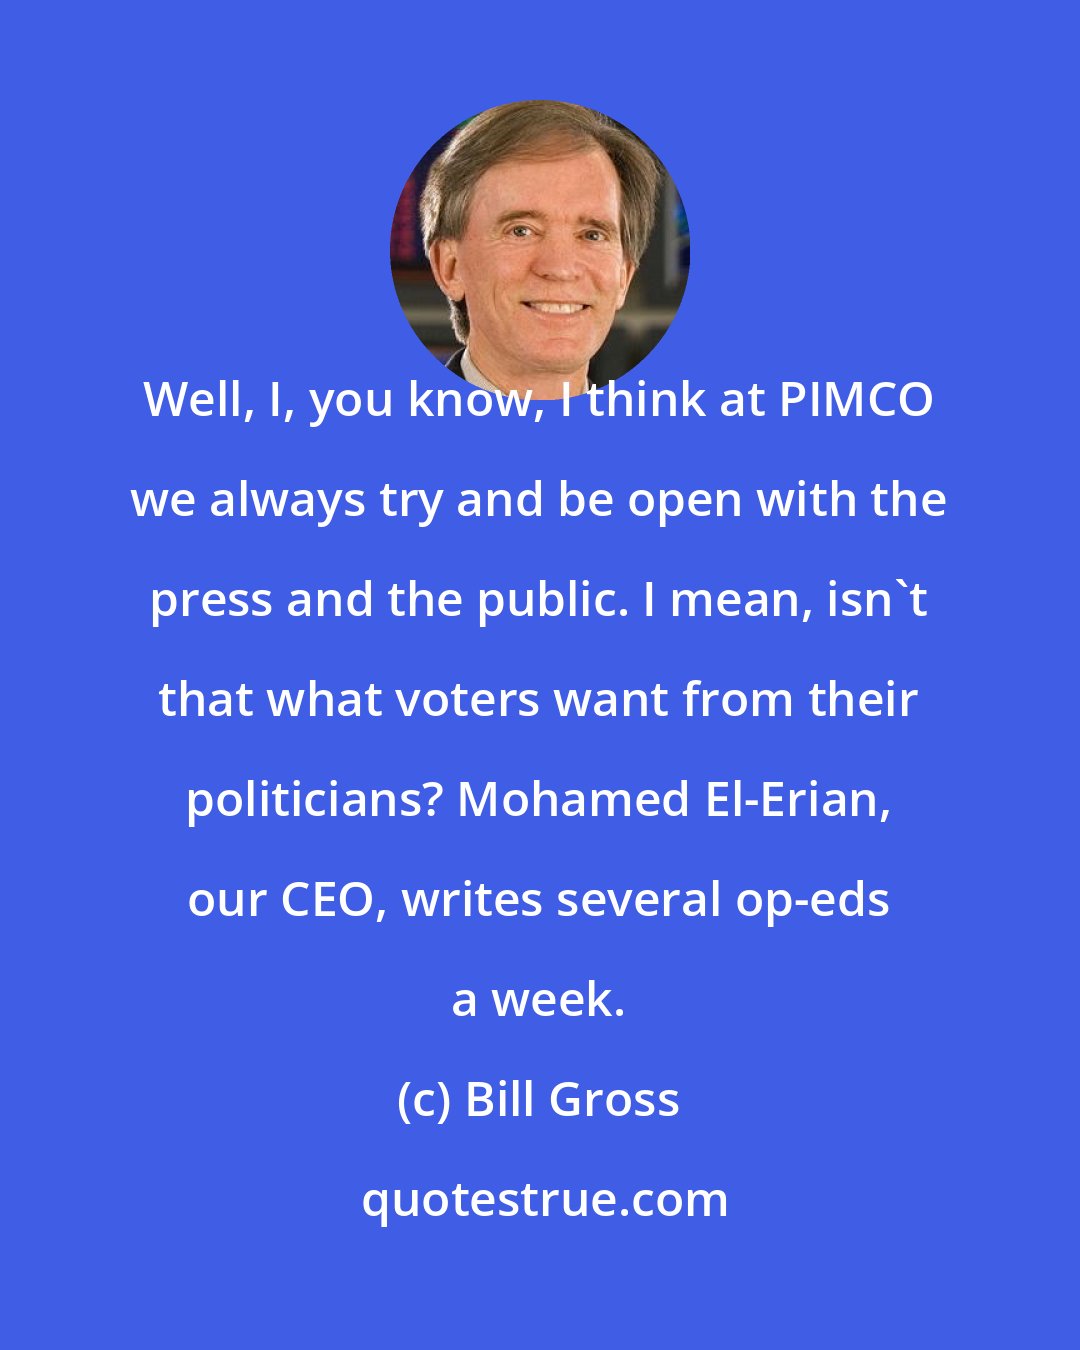 Bill Gross: Well, I, you know, I think at PIMCO we always try and be open with the press and the public. I mean, isn't that what voters want from their politicians? Mohamed El-Erian, our CEO, writes several op-eds a week.